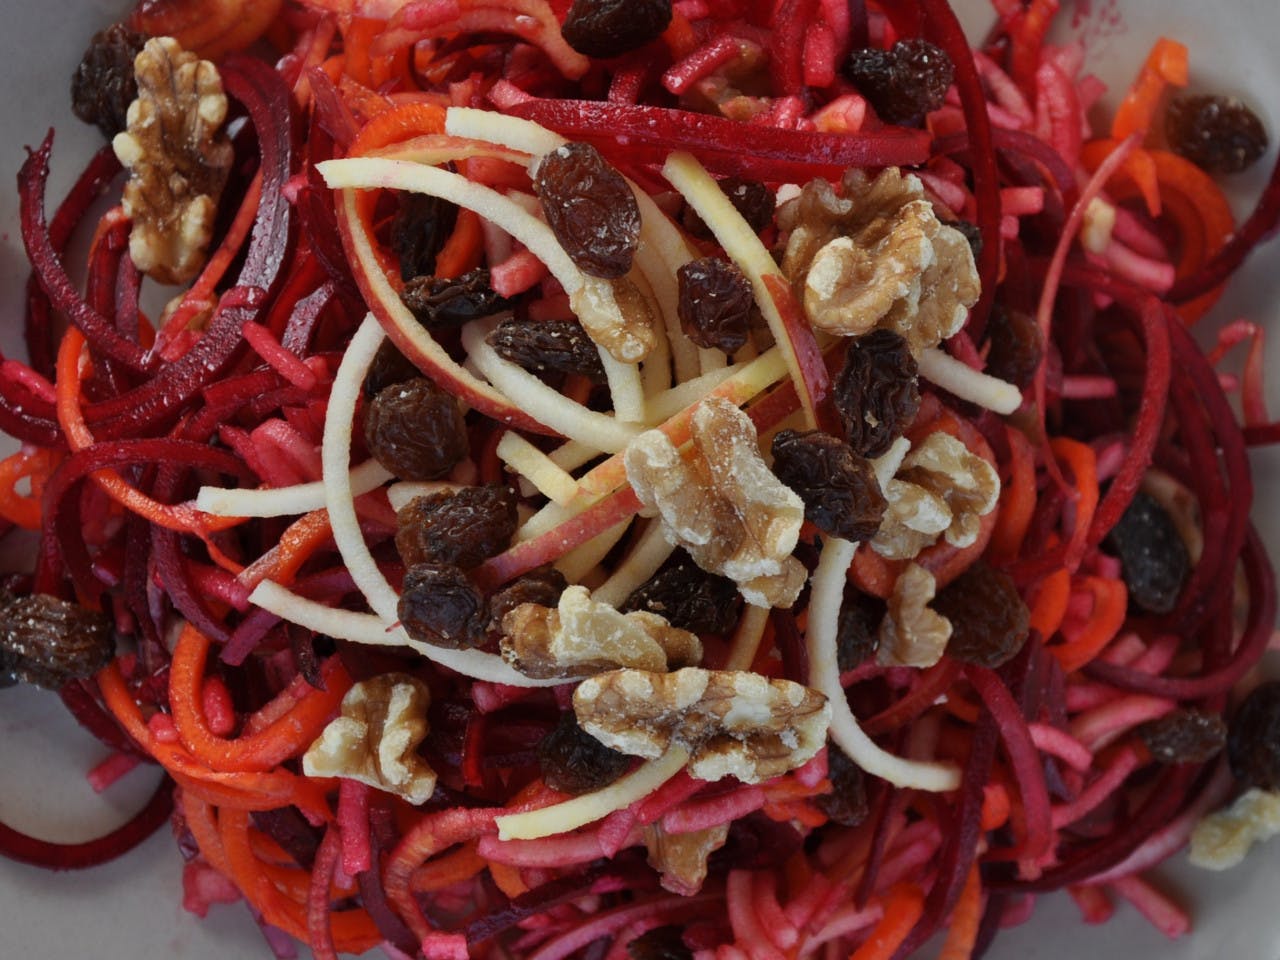 Beetroot spaghetti with apple and carrot